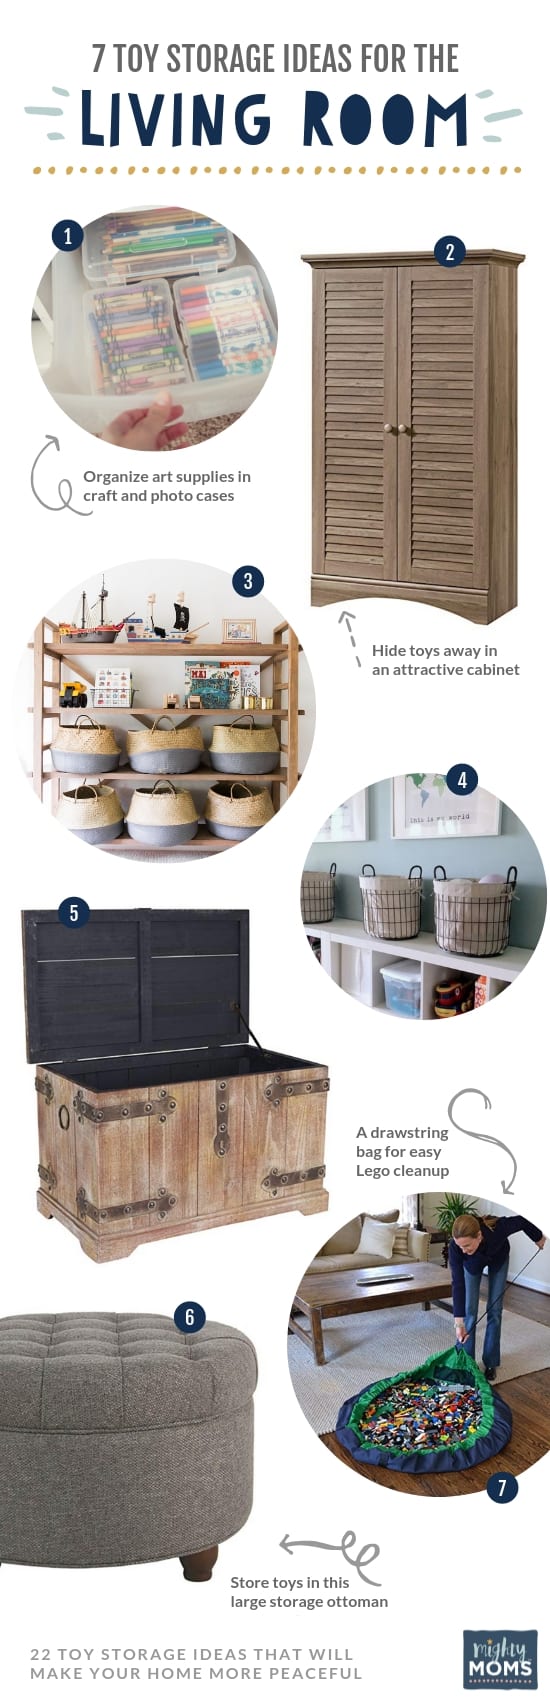 7 Toy Storage Ideas for the Living Room - MightyMoms.club